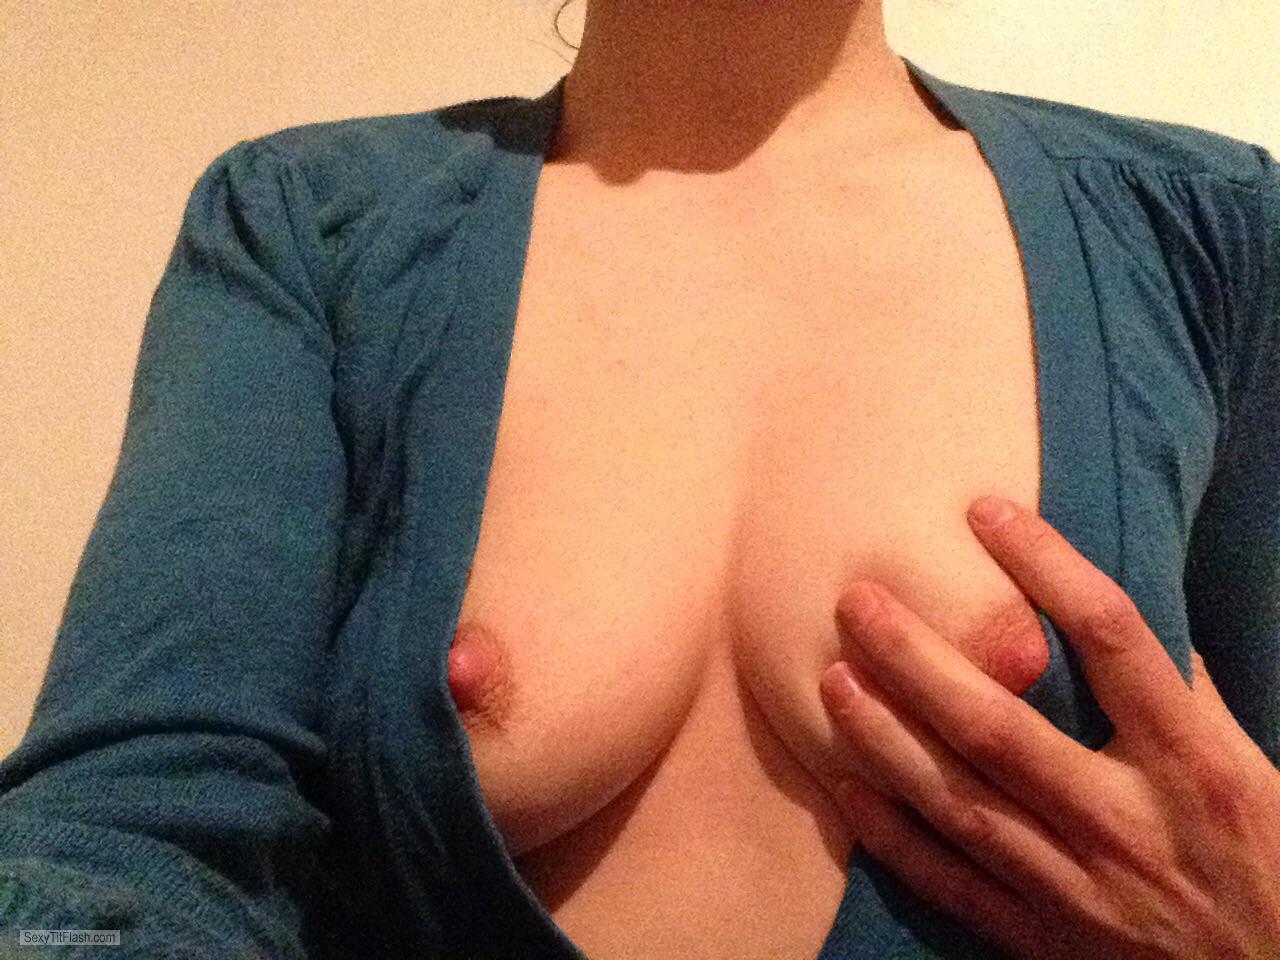 Tit Flash: My Small Tits (Selfie) - Sophie from United Kingdom